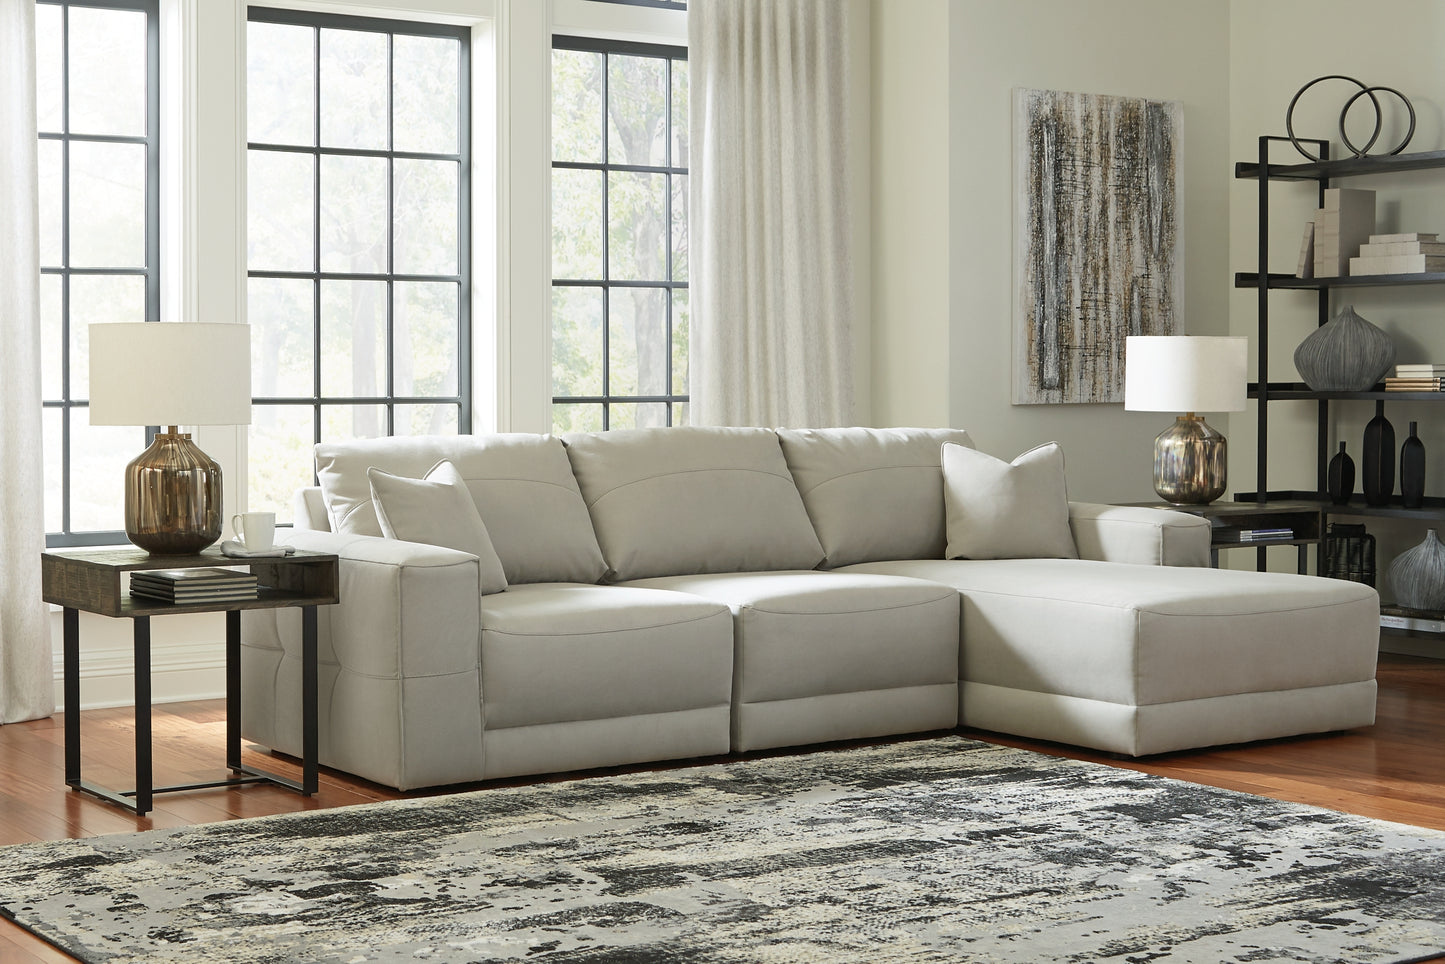 Next-Gen Gaucho 3-Piece Sectional Sofa with Chaise Benchcraft®